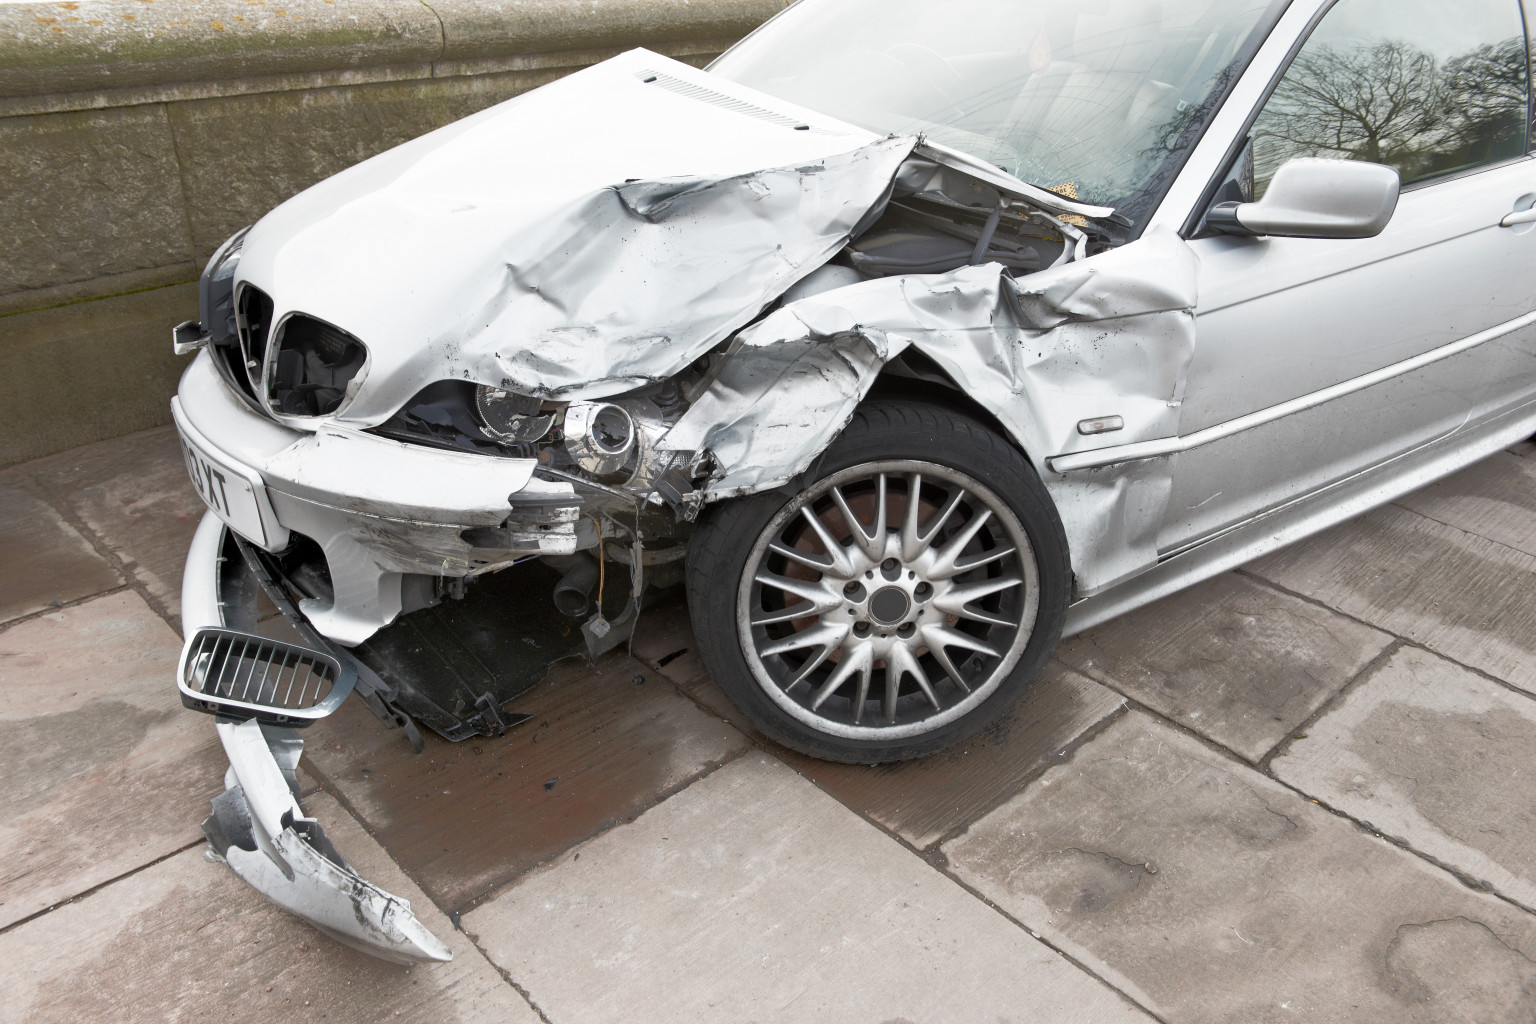 ... insurance companies, auto glass installers, towing companies and